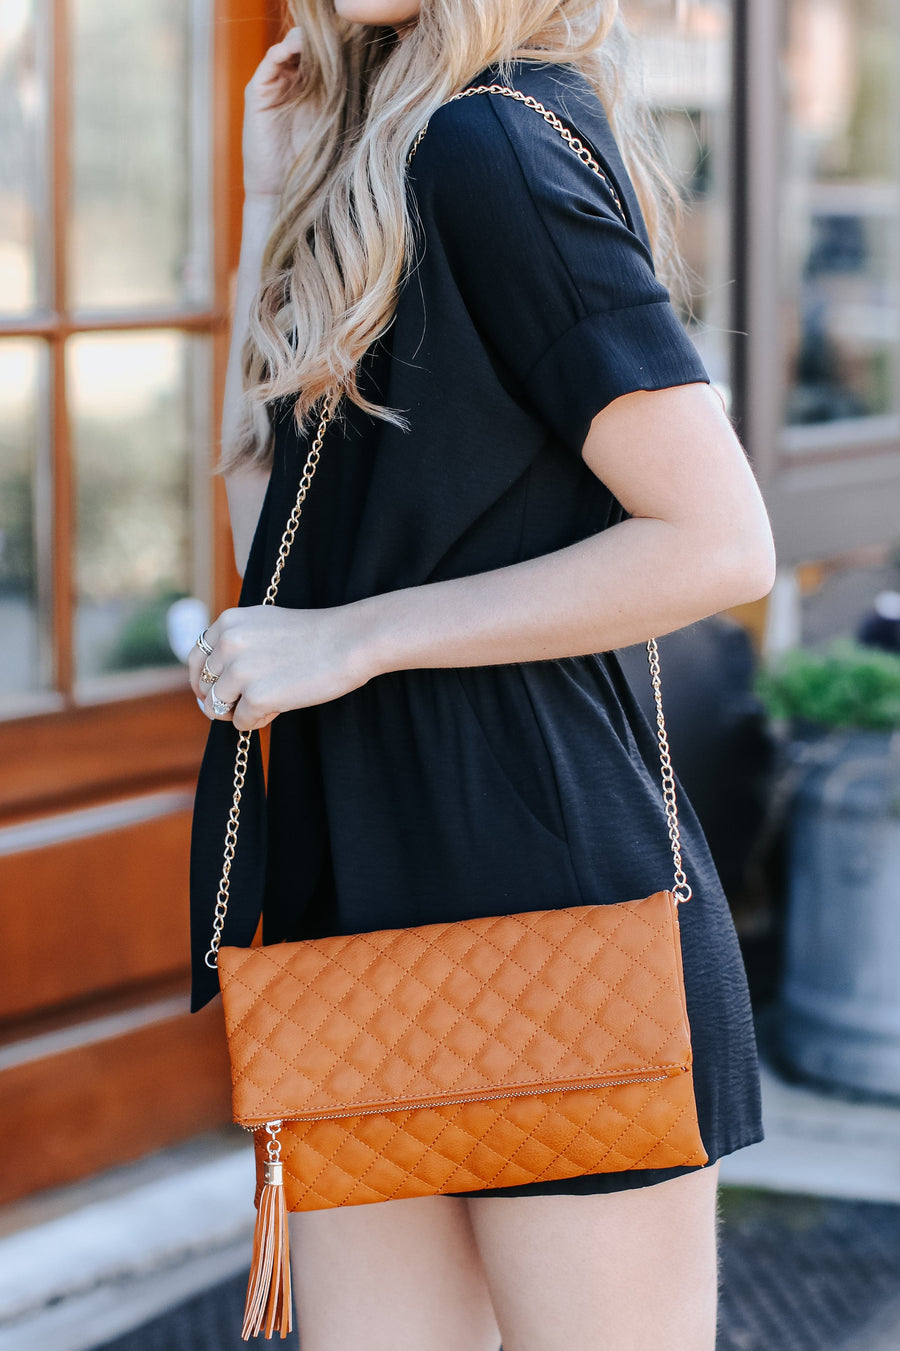  Glambition Quilted Faux Leather Clutch - Dark Tan - FINAL SALE - Madison and Mallory